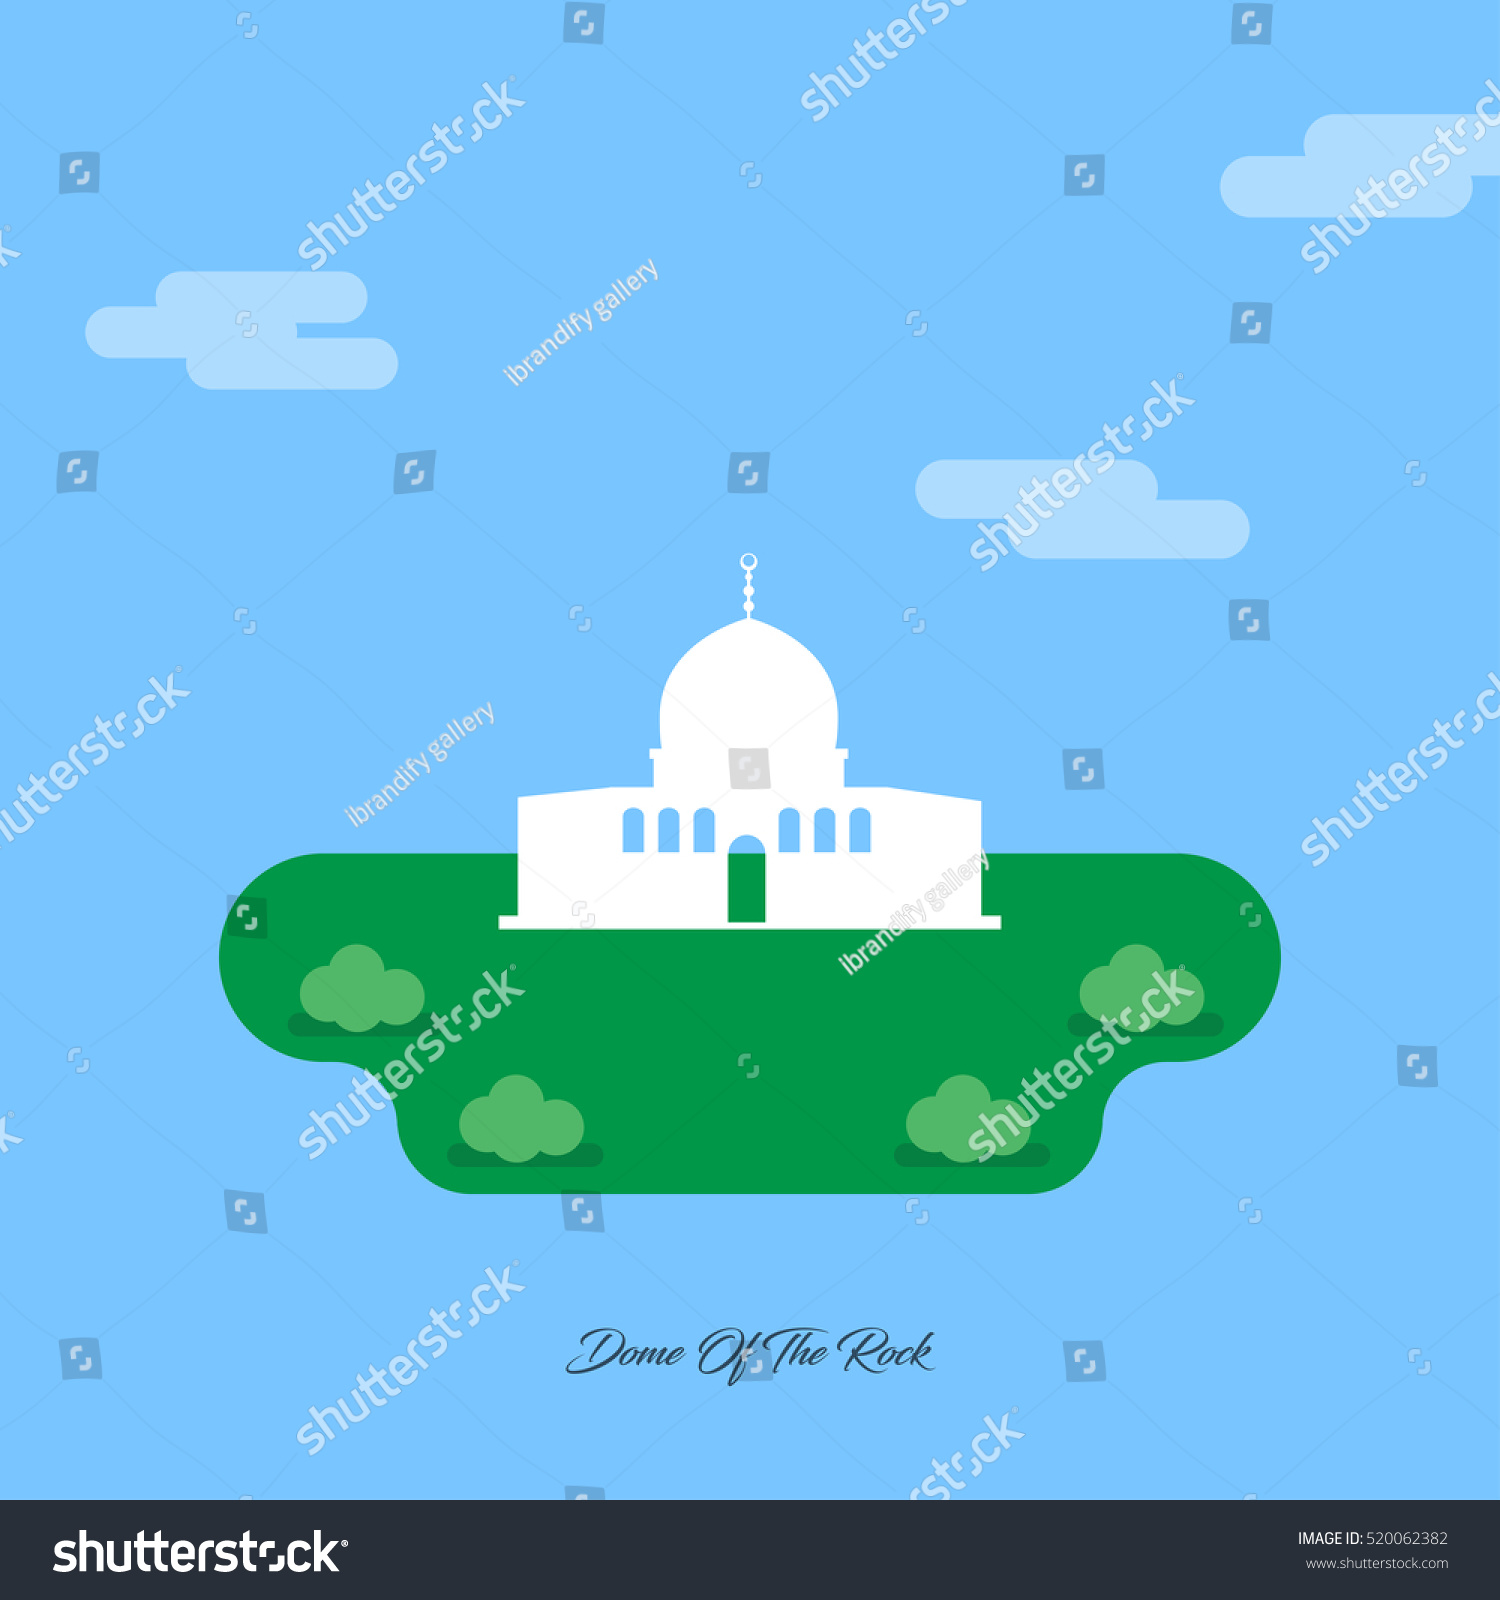 Dome Rock Abstract Monument Silhouette On Stock Vector 520062382 ...